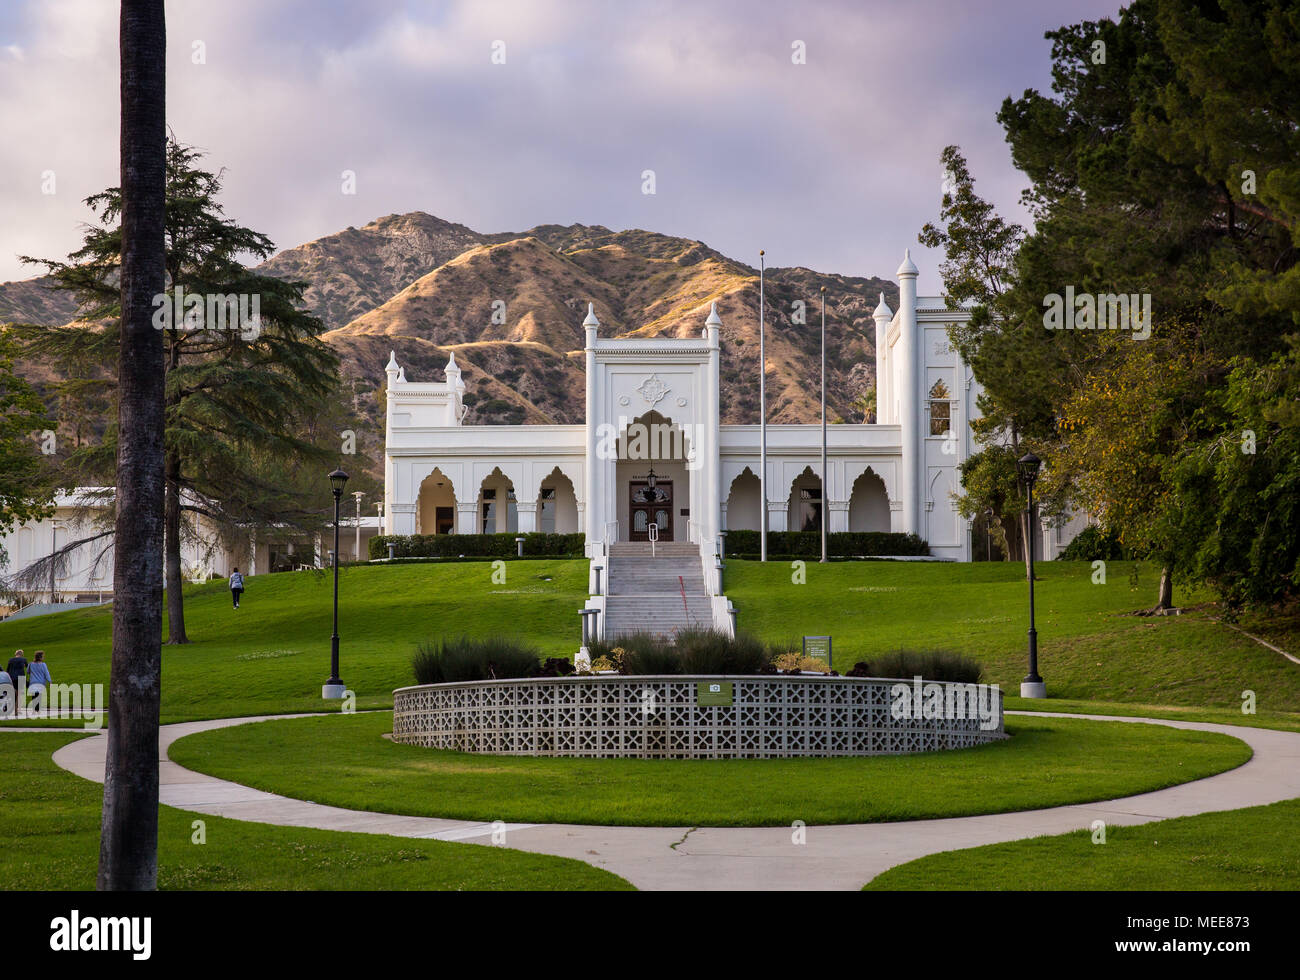 Exterior view of The Brand Library, in Glendale, California, with Verdugo Mountains in the background. Stock Photo